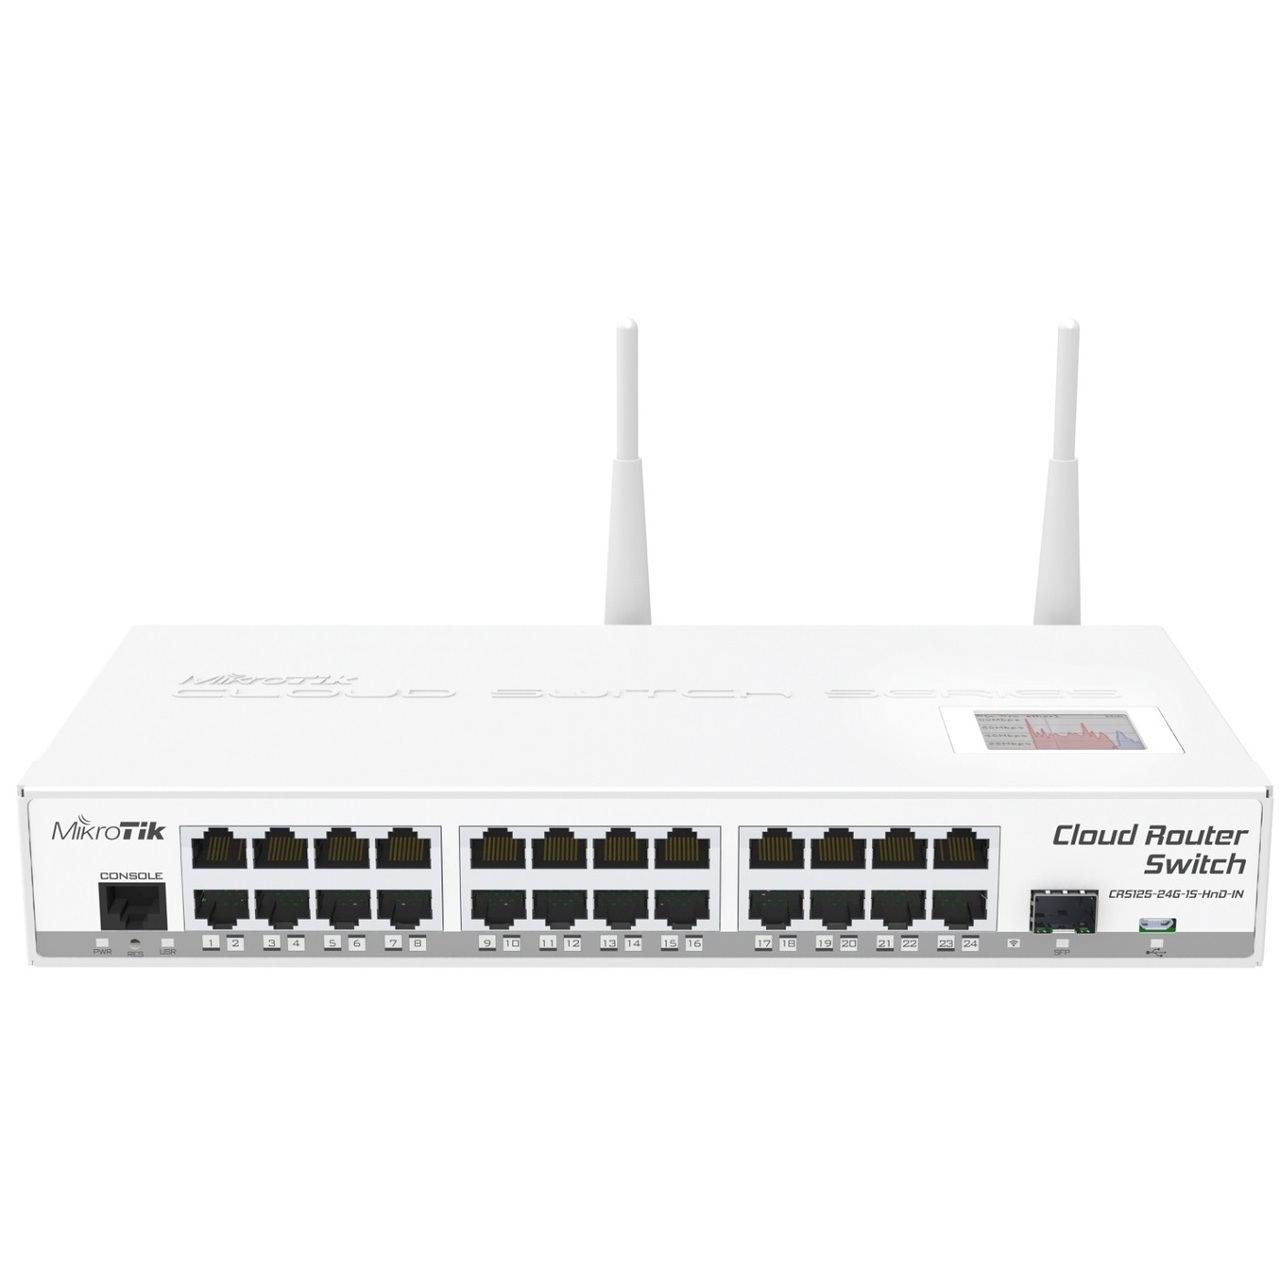 Cloud Router Switch CRS125 24G 1S 2HND